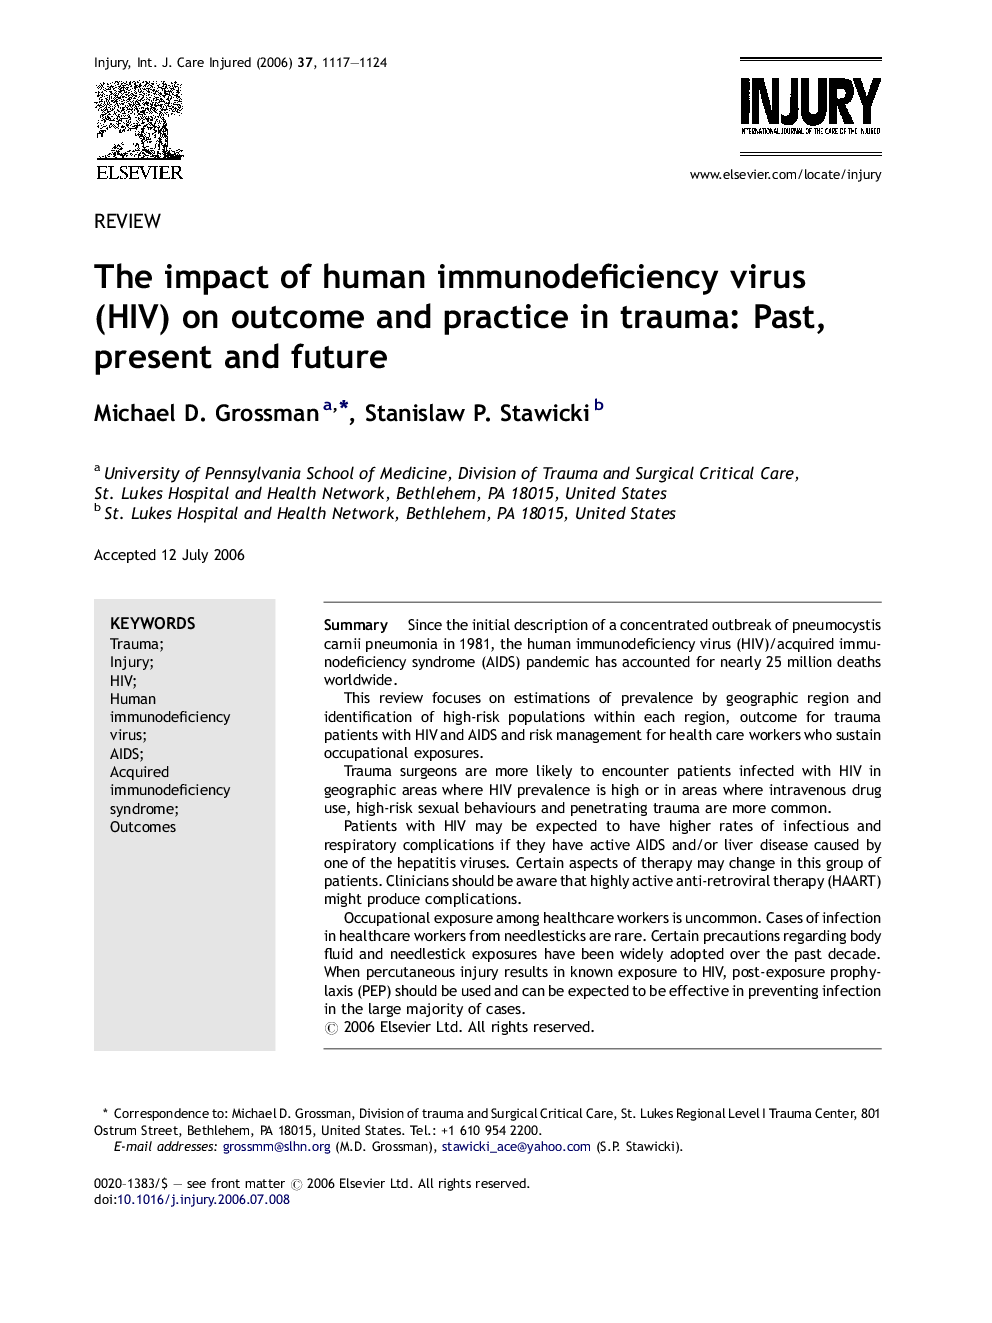 The impact of human immunodeficiency virus (HIV) on outcome and practice in trauma: Past, present and future